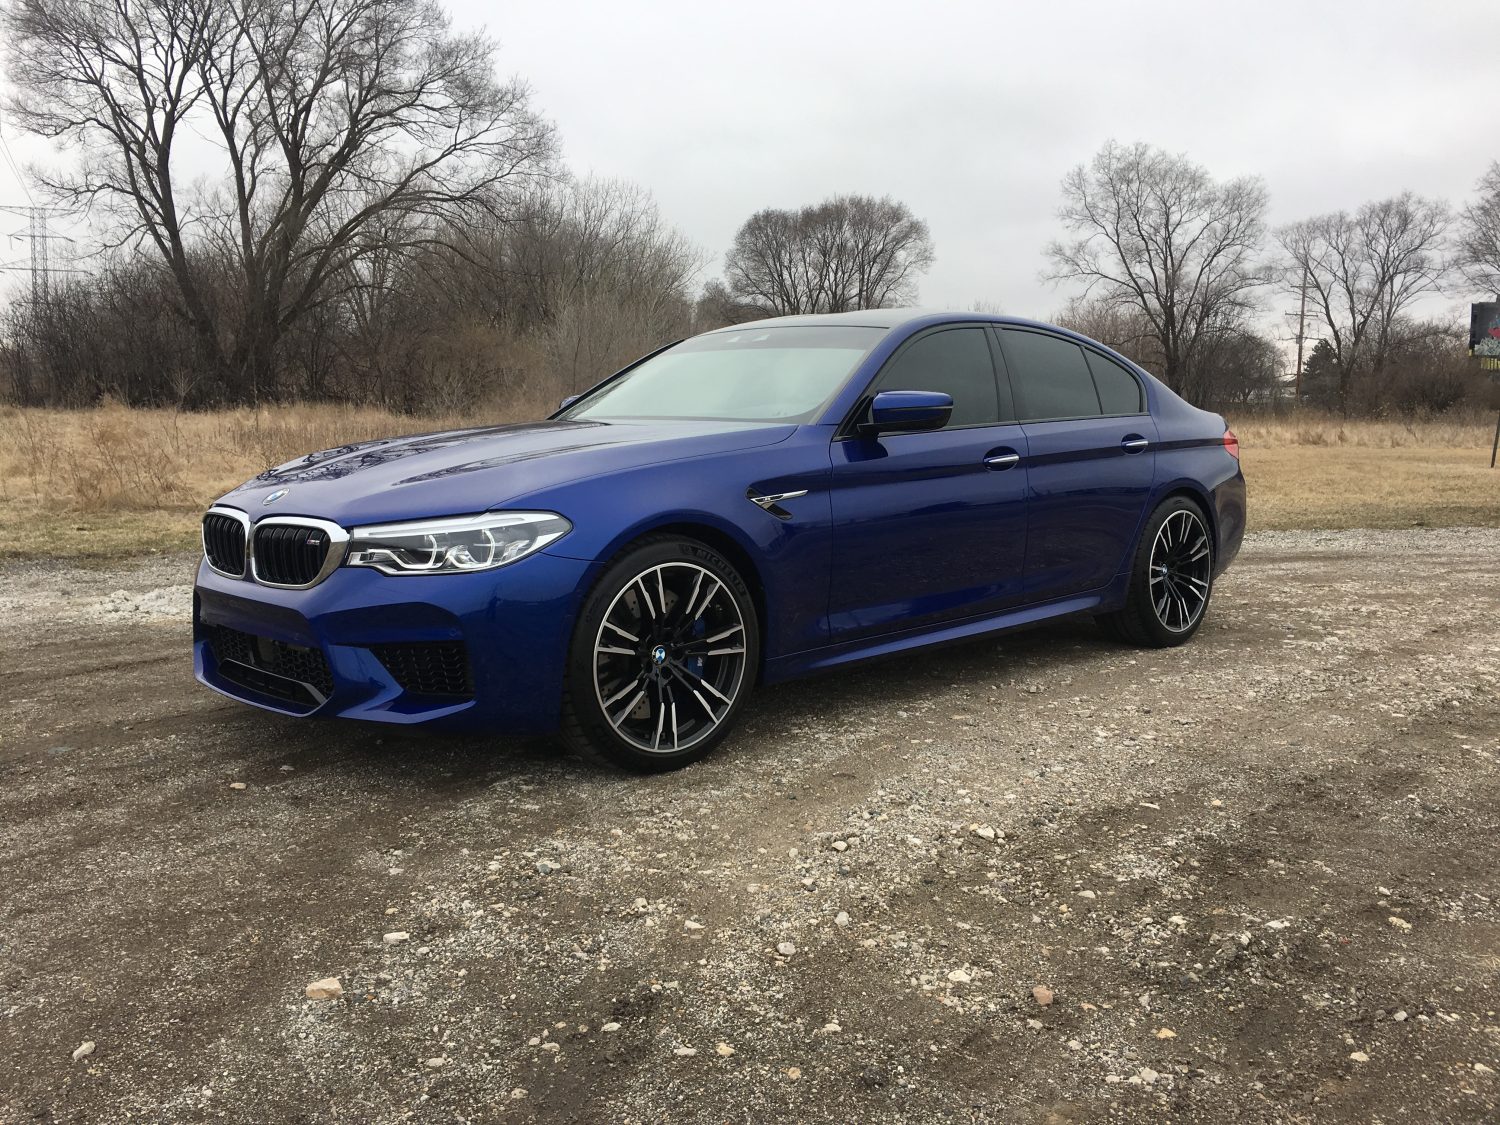 2018 BMW m5 on a dirt road